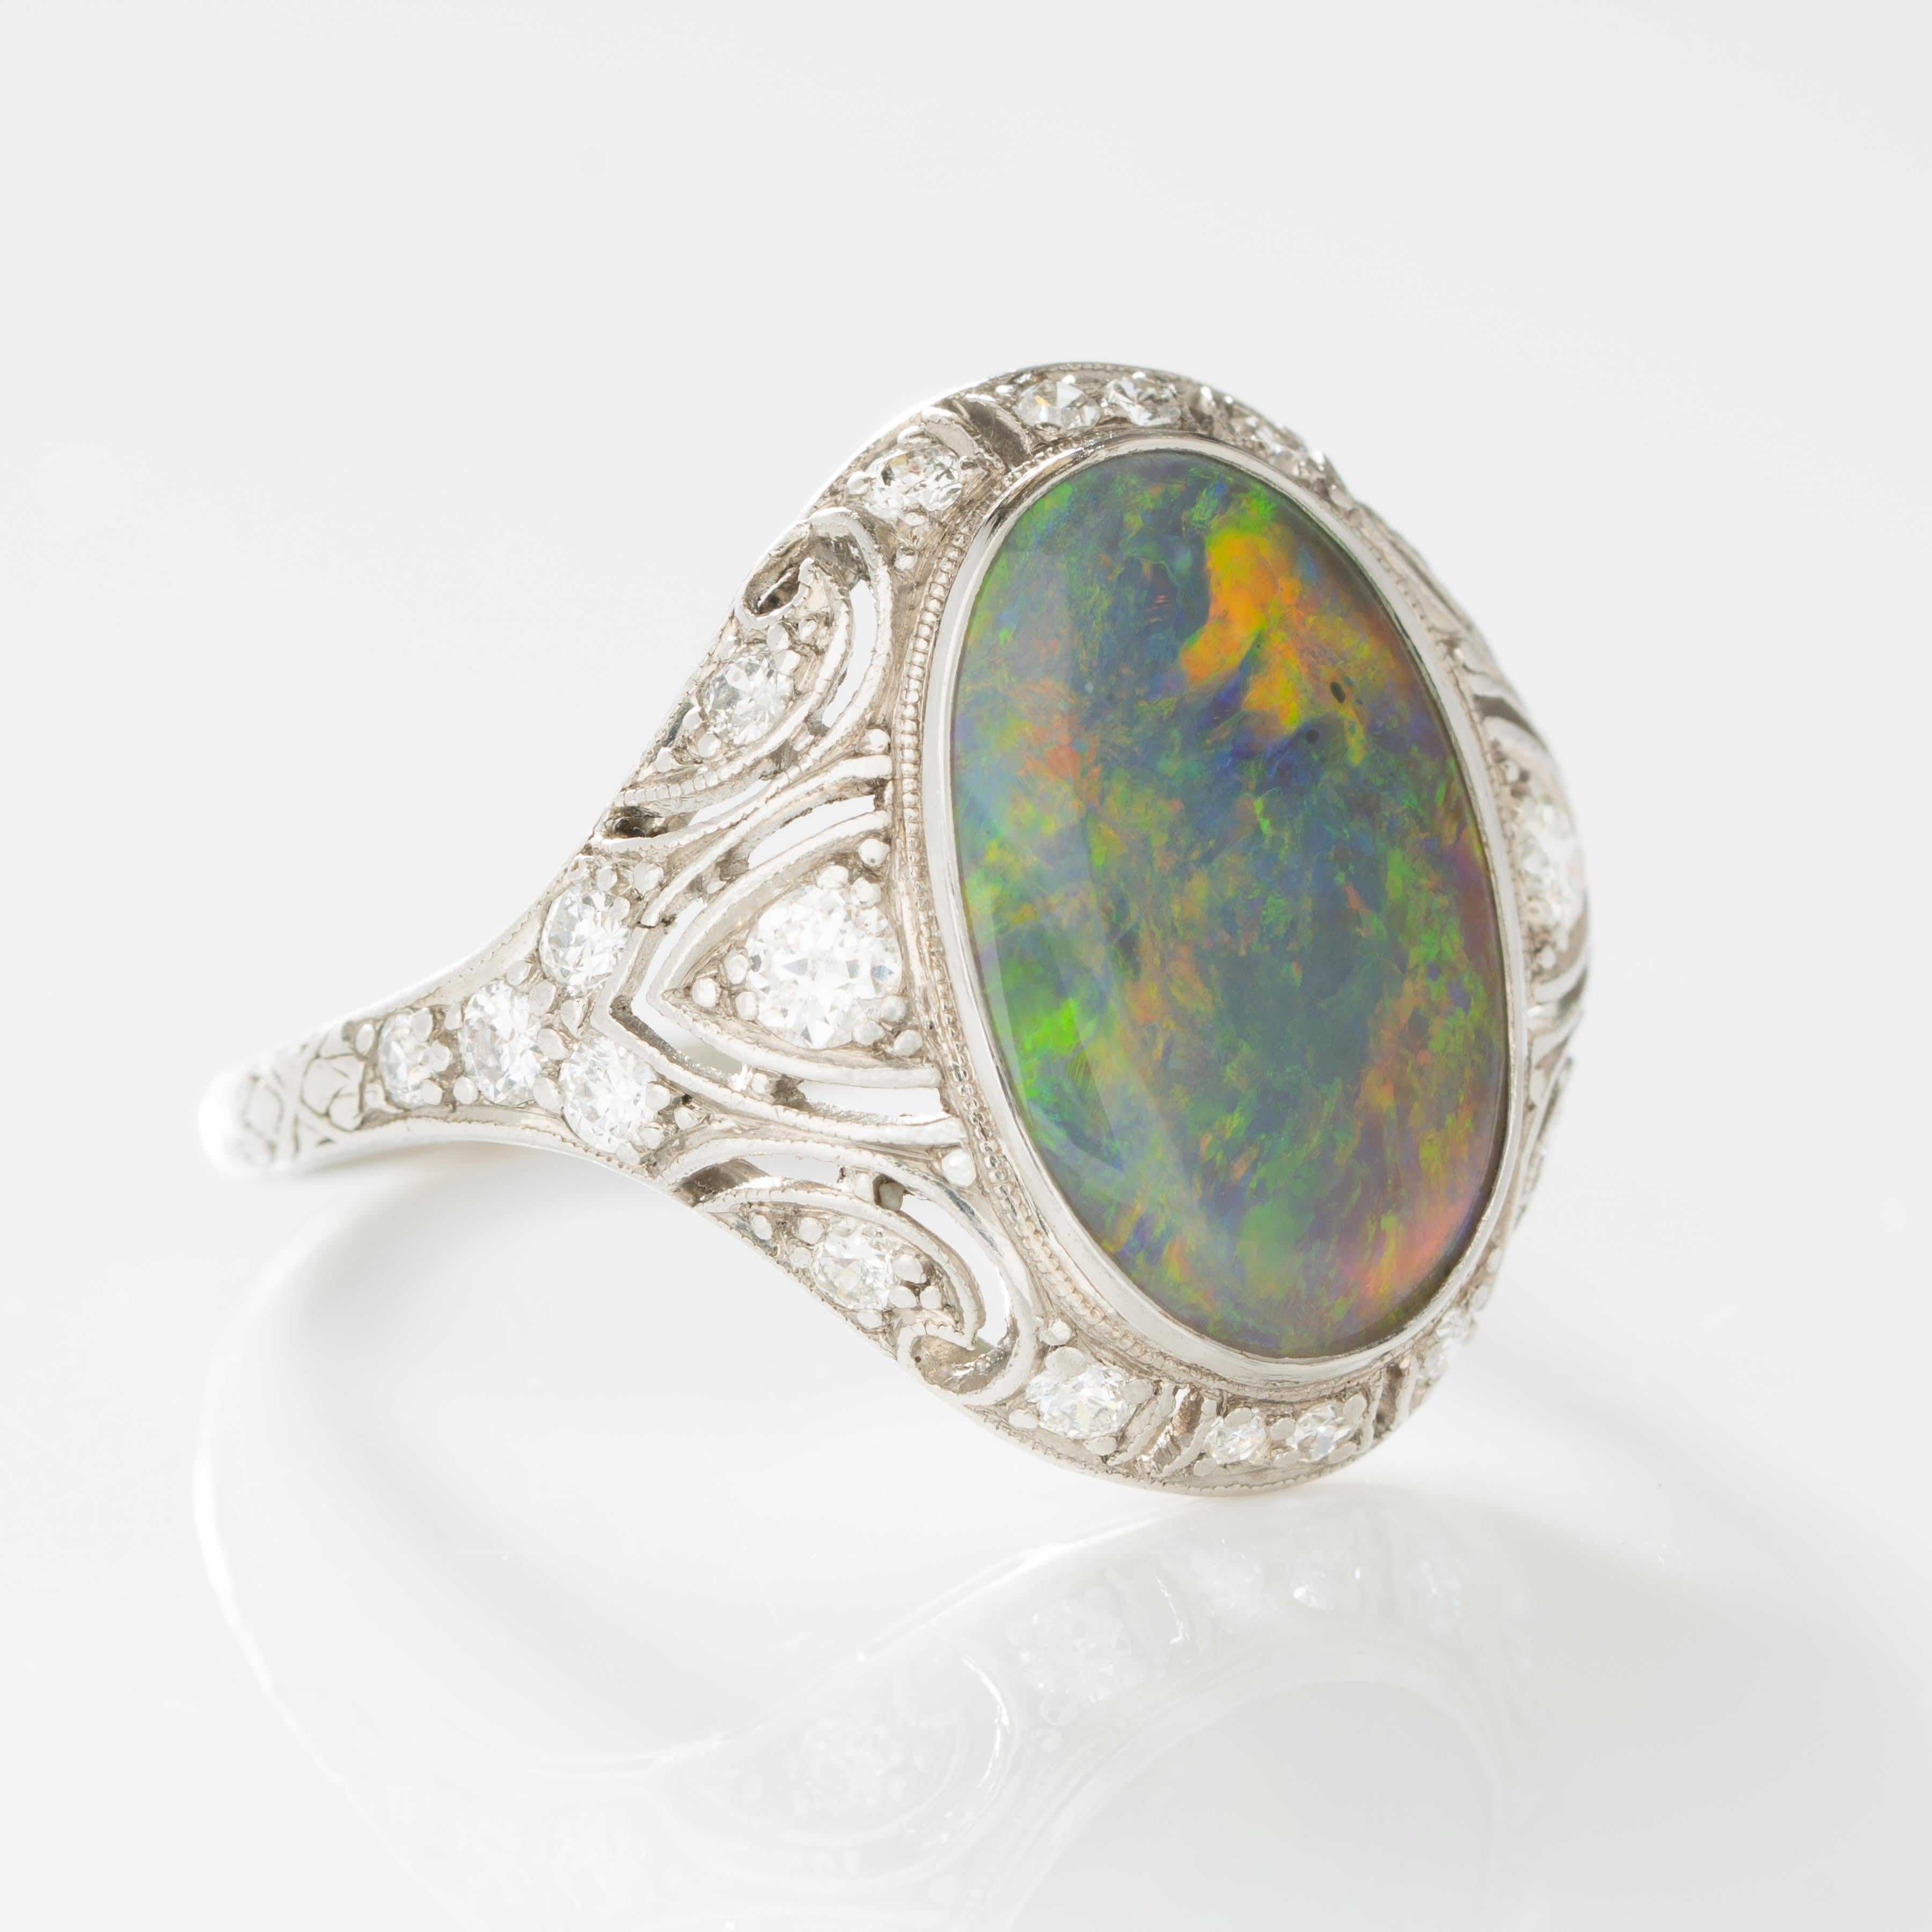 Art Deco Platinum and Diamond and Black Opal Ring
c.1930
Size 8
4.73 grams